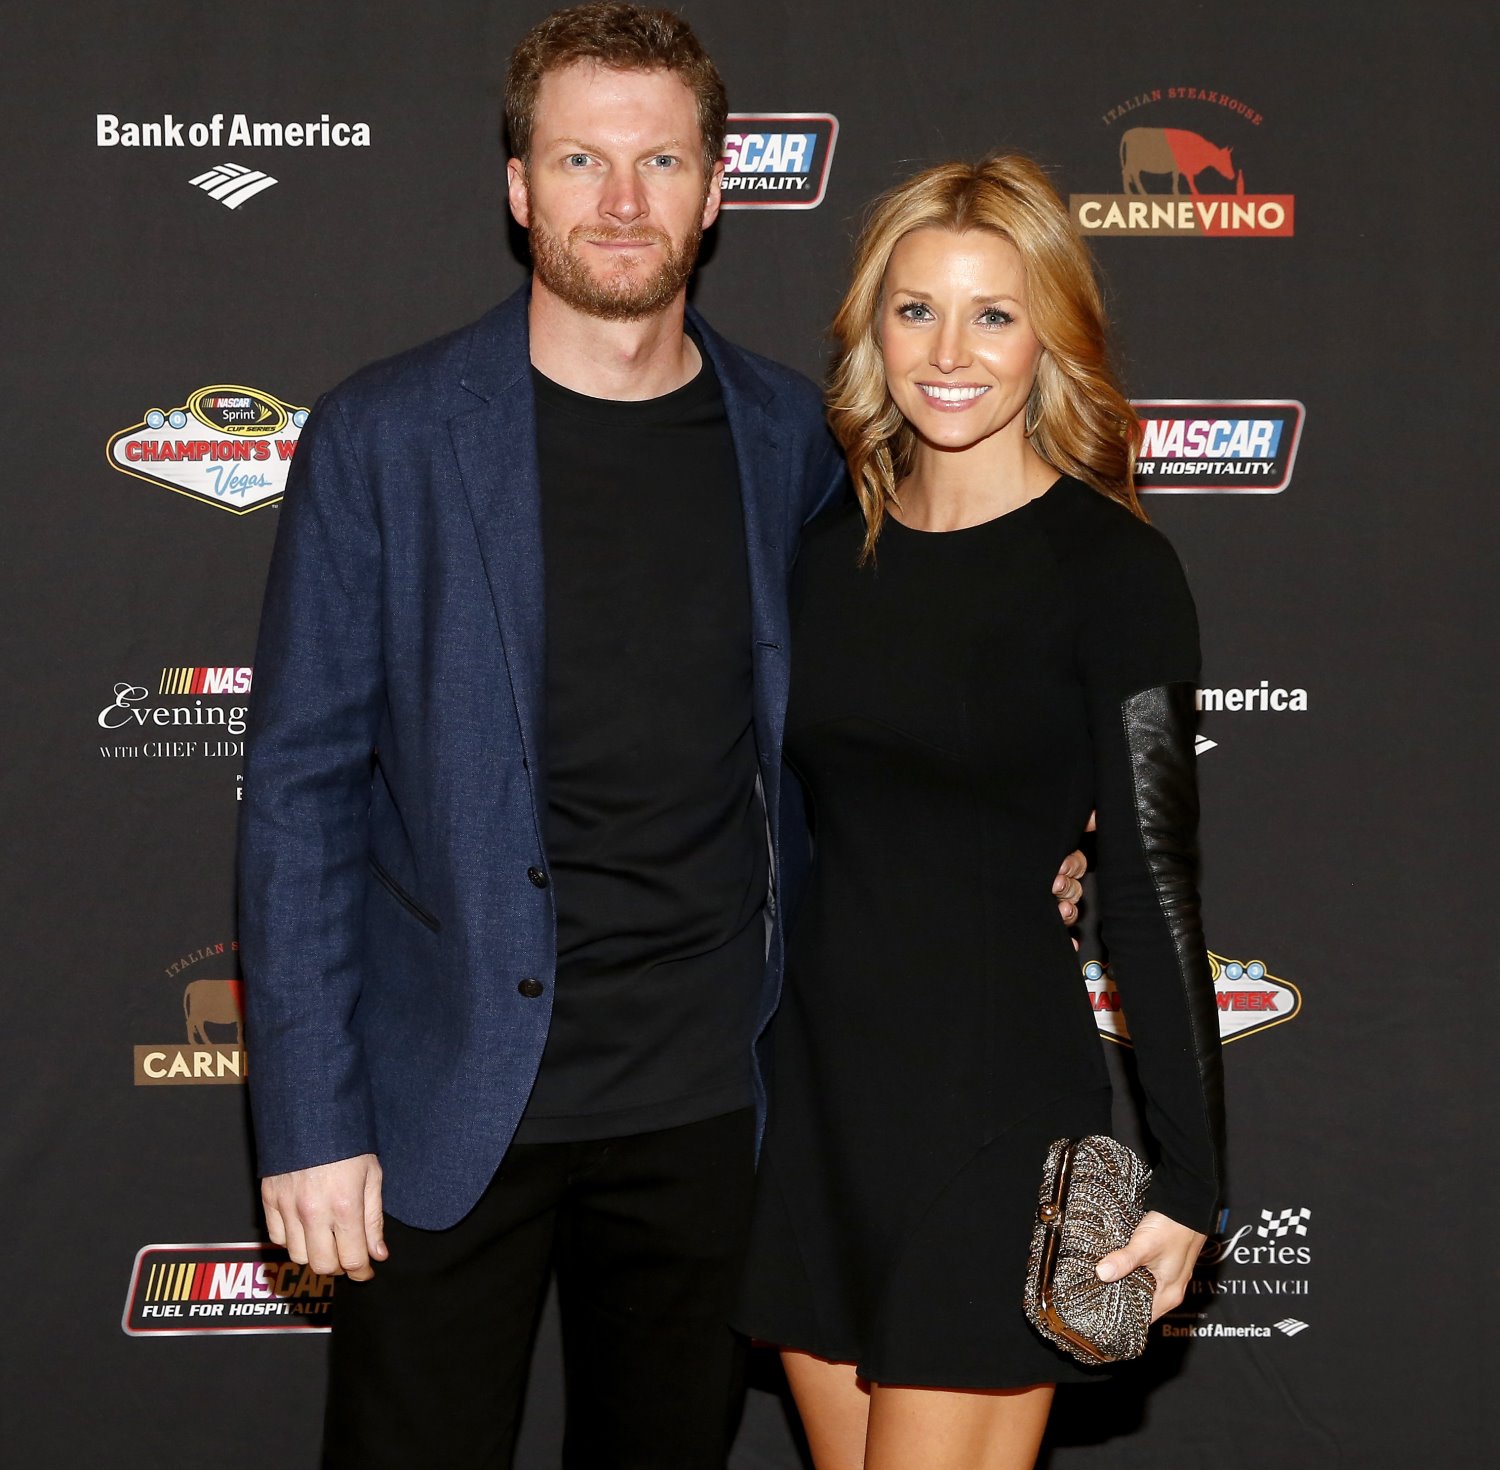 Dale Jr. and wife Amy